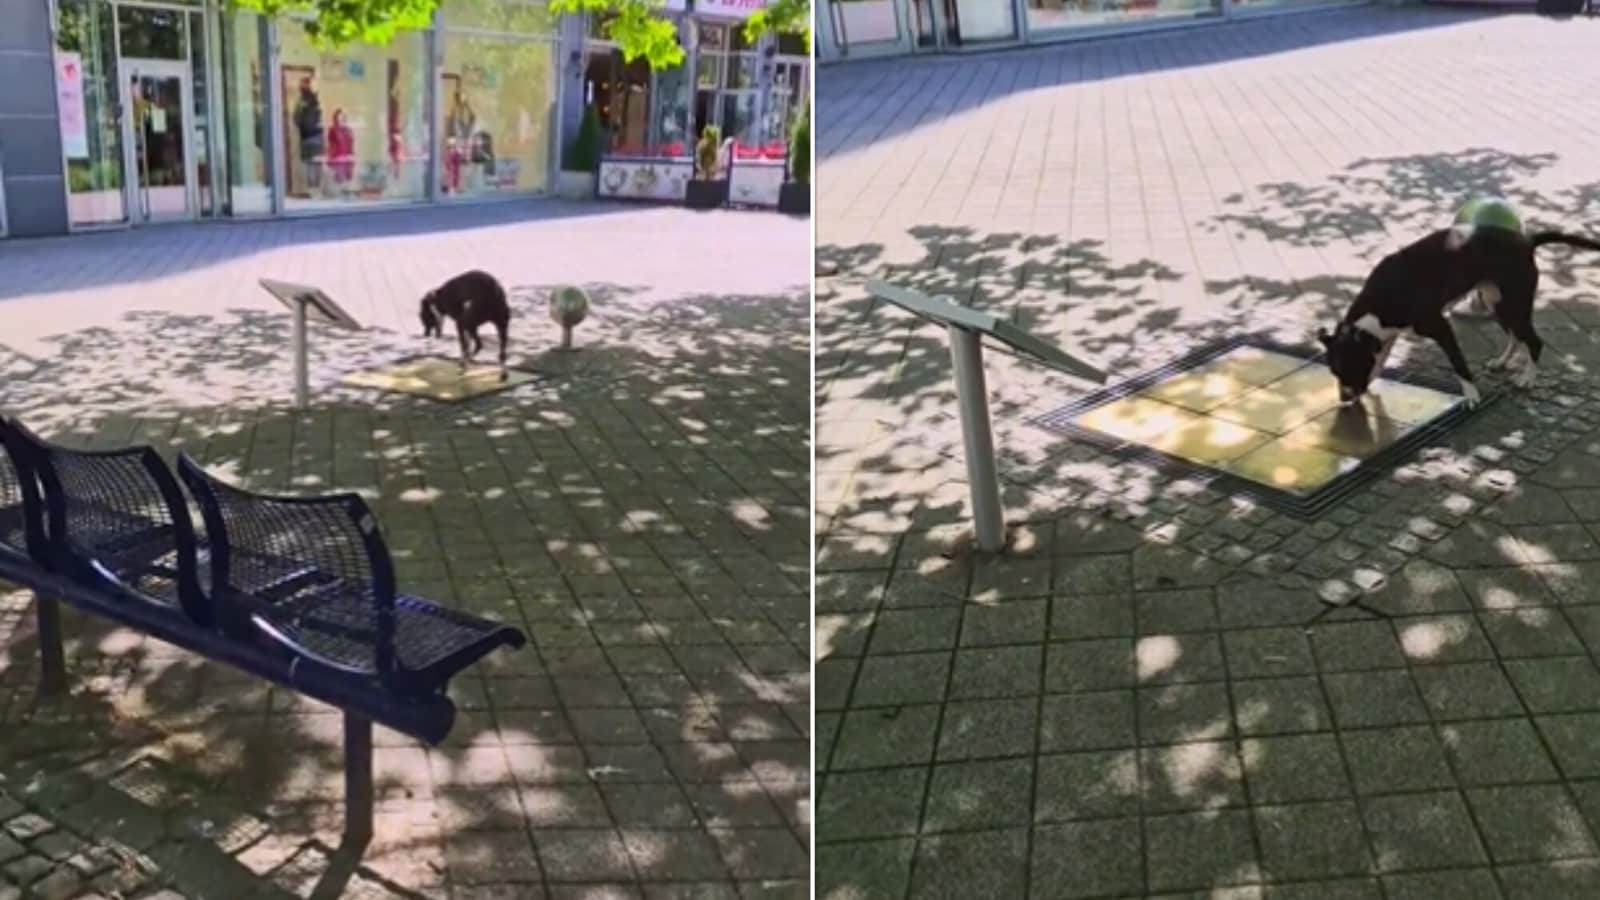 Dog creates ‘masterpiece’ while jumping on musical tiles. Watch